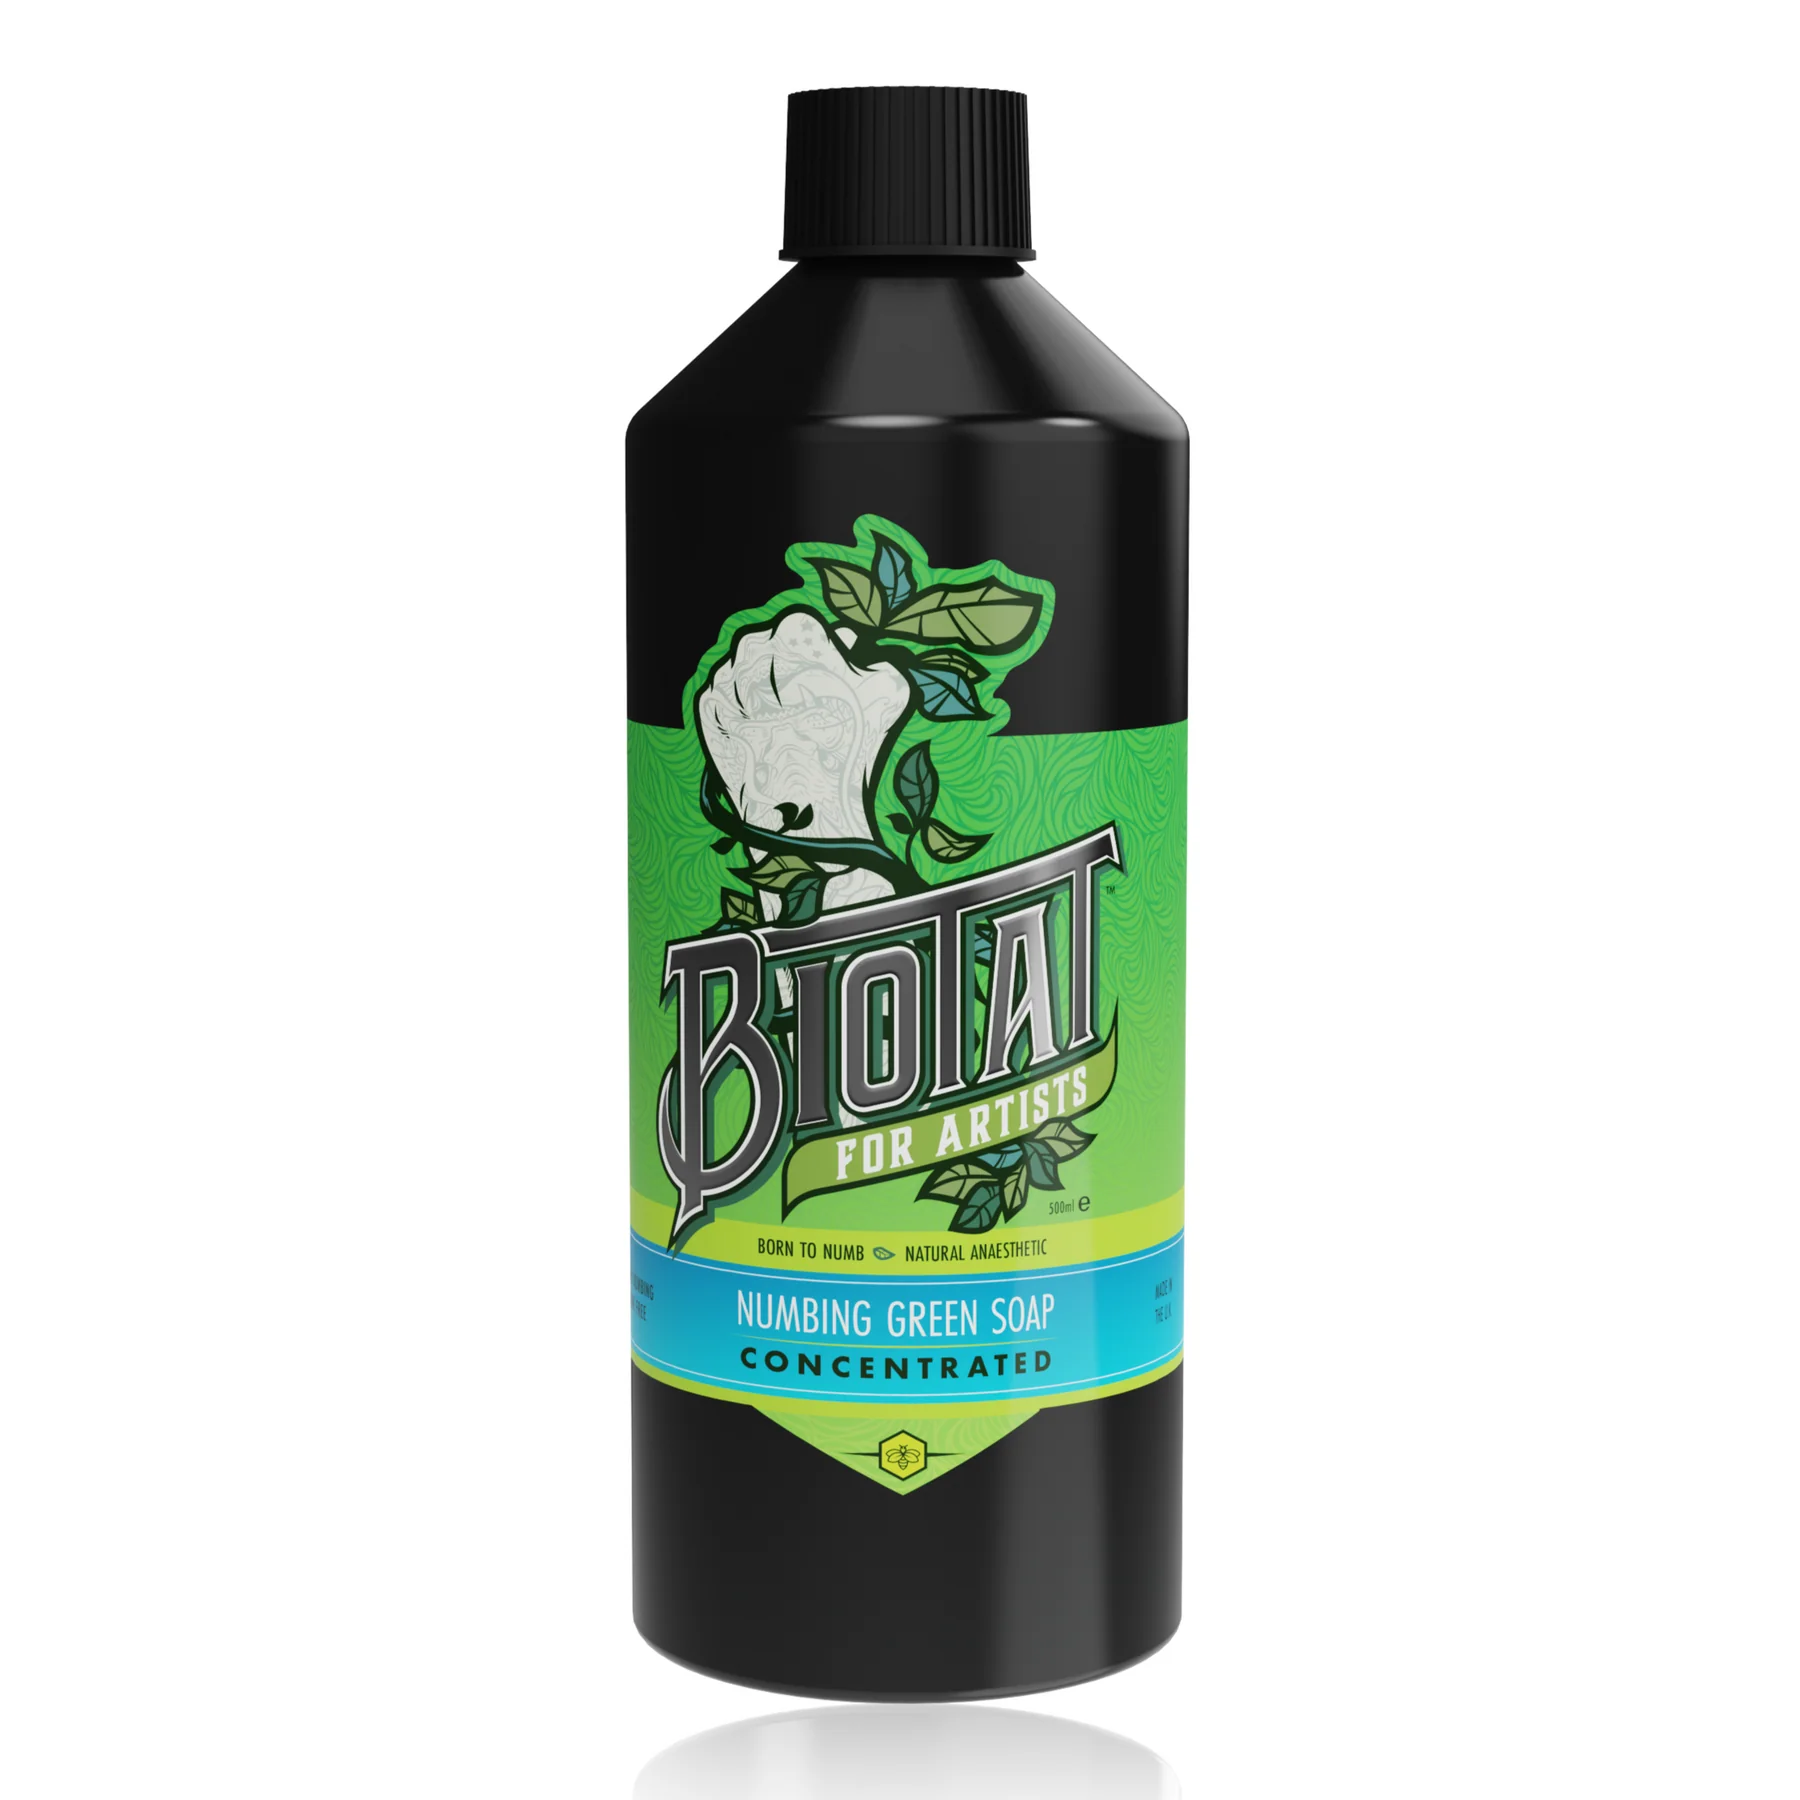 Biotat - Numbing Tattoo Green Soap Concentrate - 500 ml